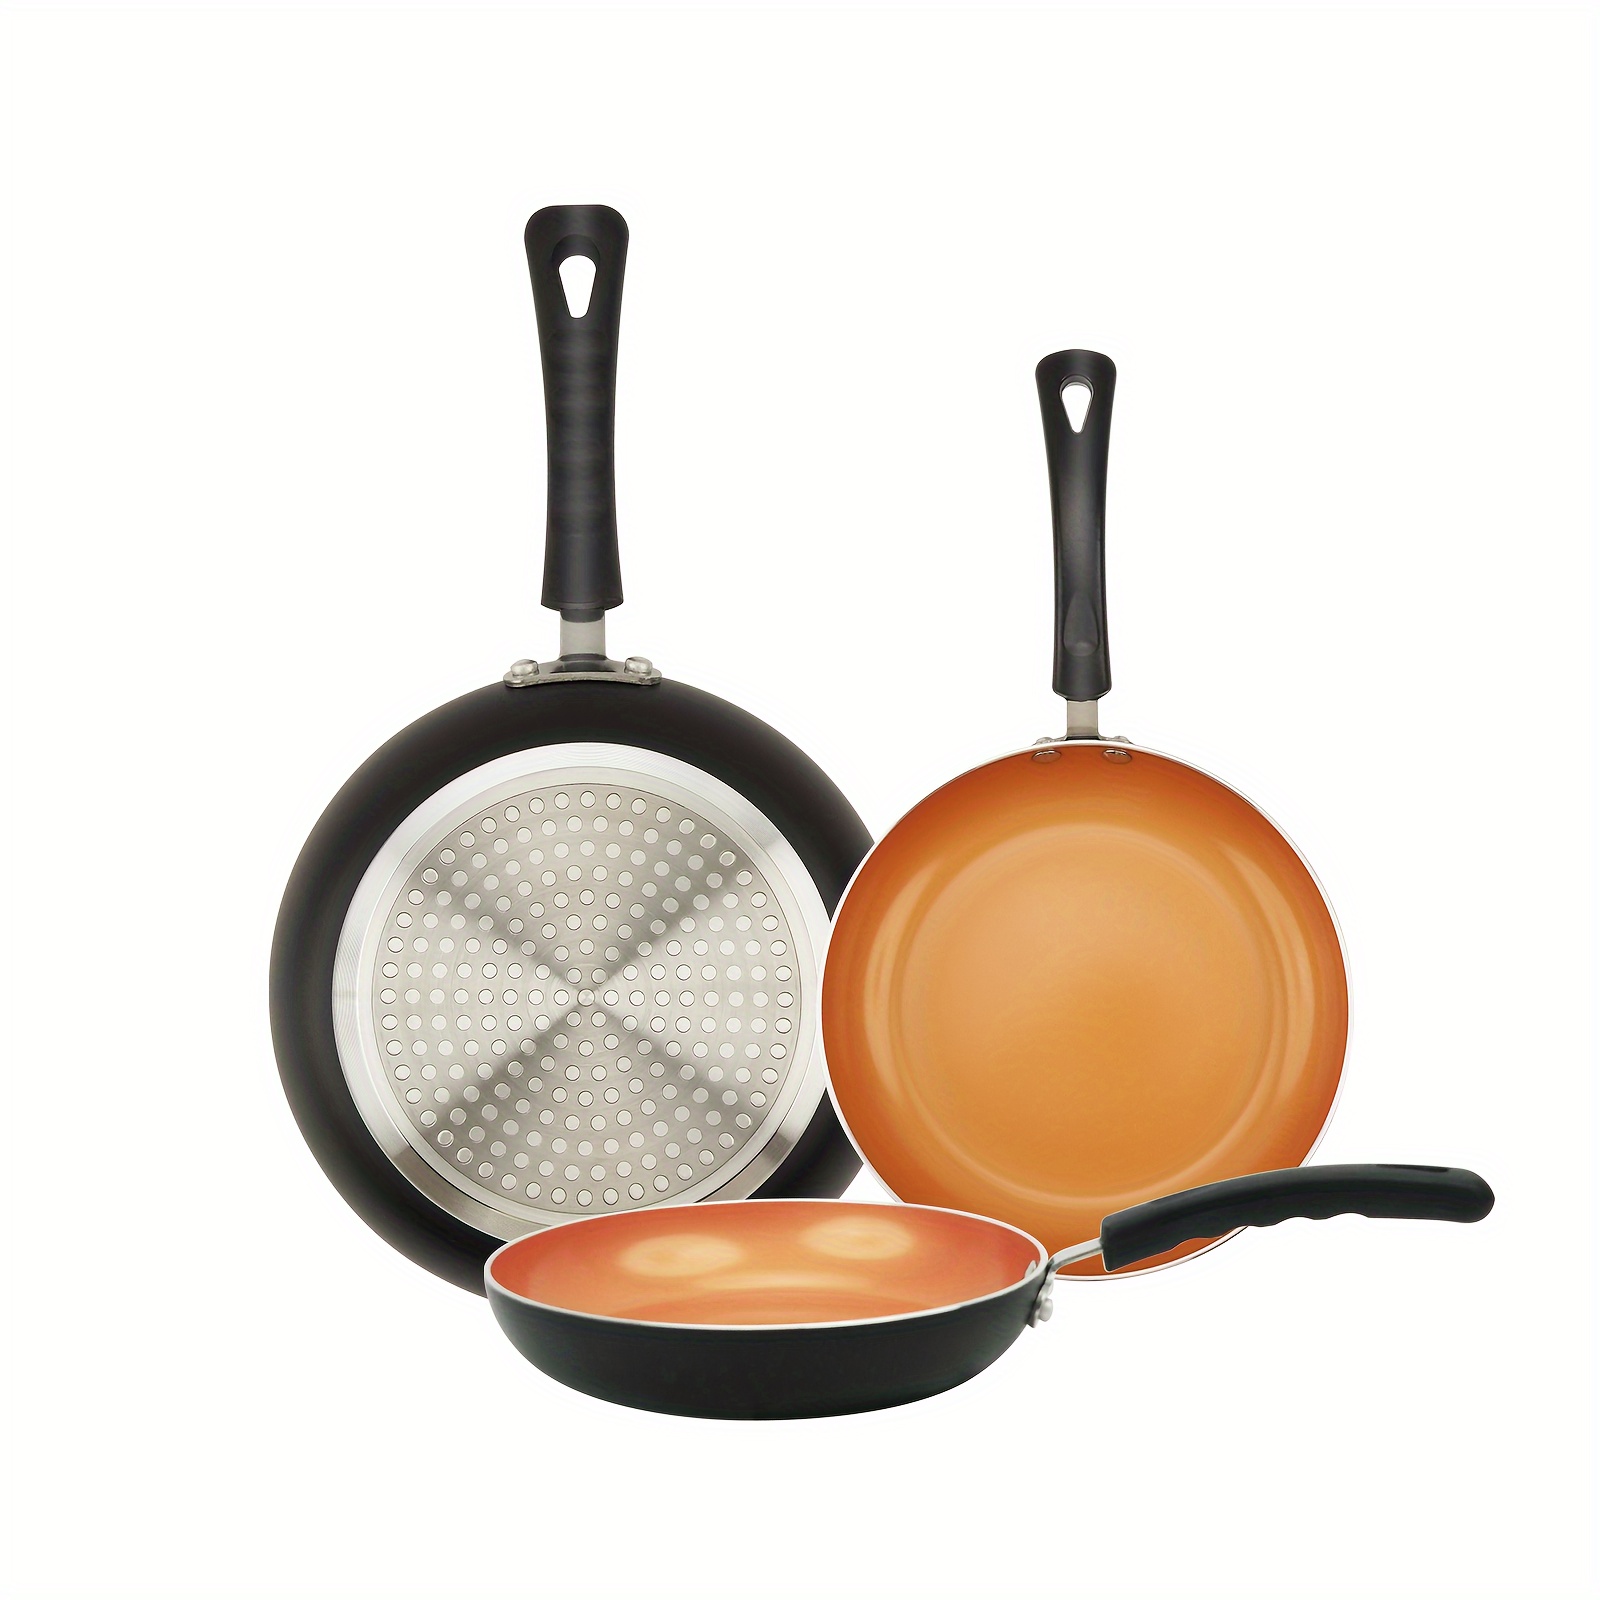 Frying Pan Set with Lids - Nonstick Frying Pan Set 3 Pcs, Non Stick Granite  Cookware Set, Induction Skillet Set Egg Omelette Frying Pan W/Lid, Healthy